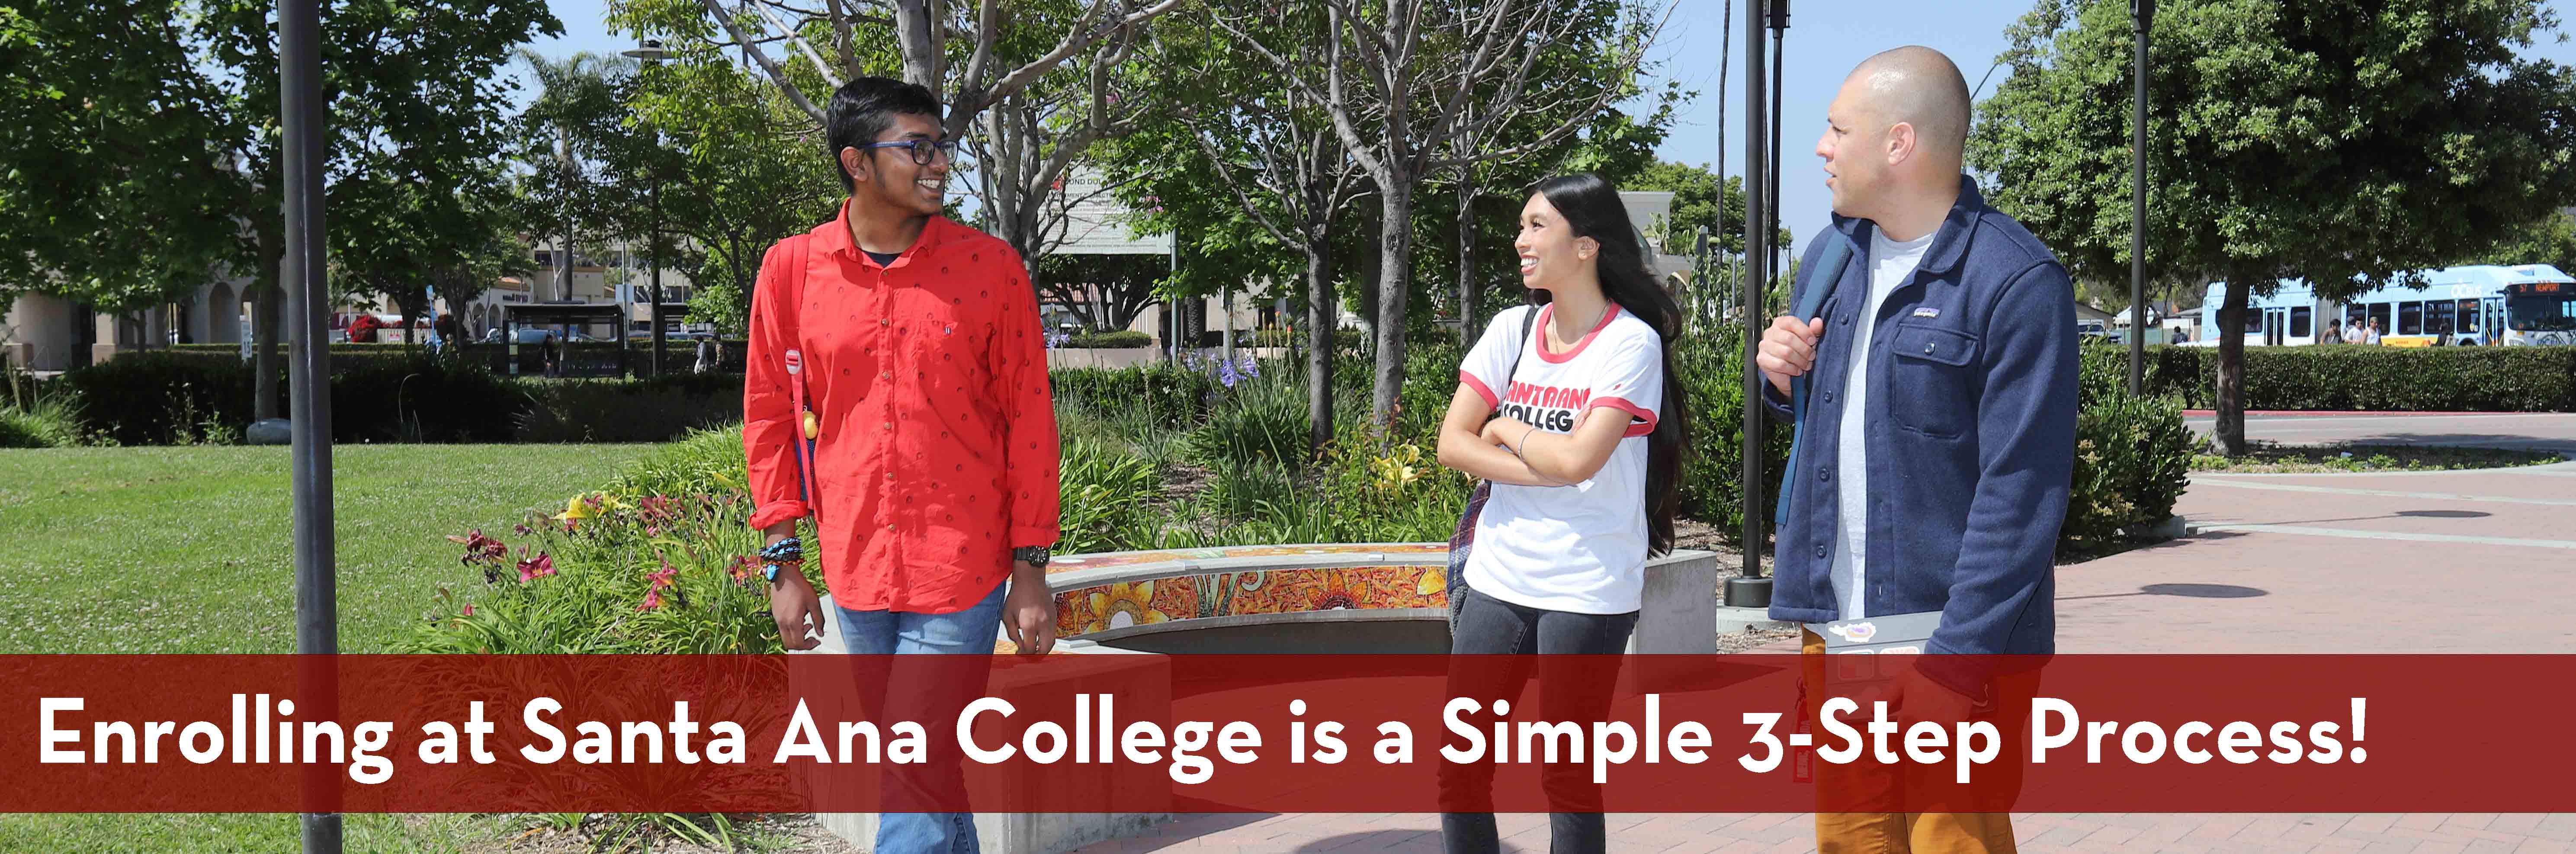 header image of students walking on campus